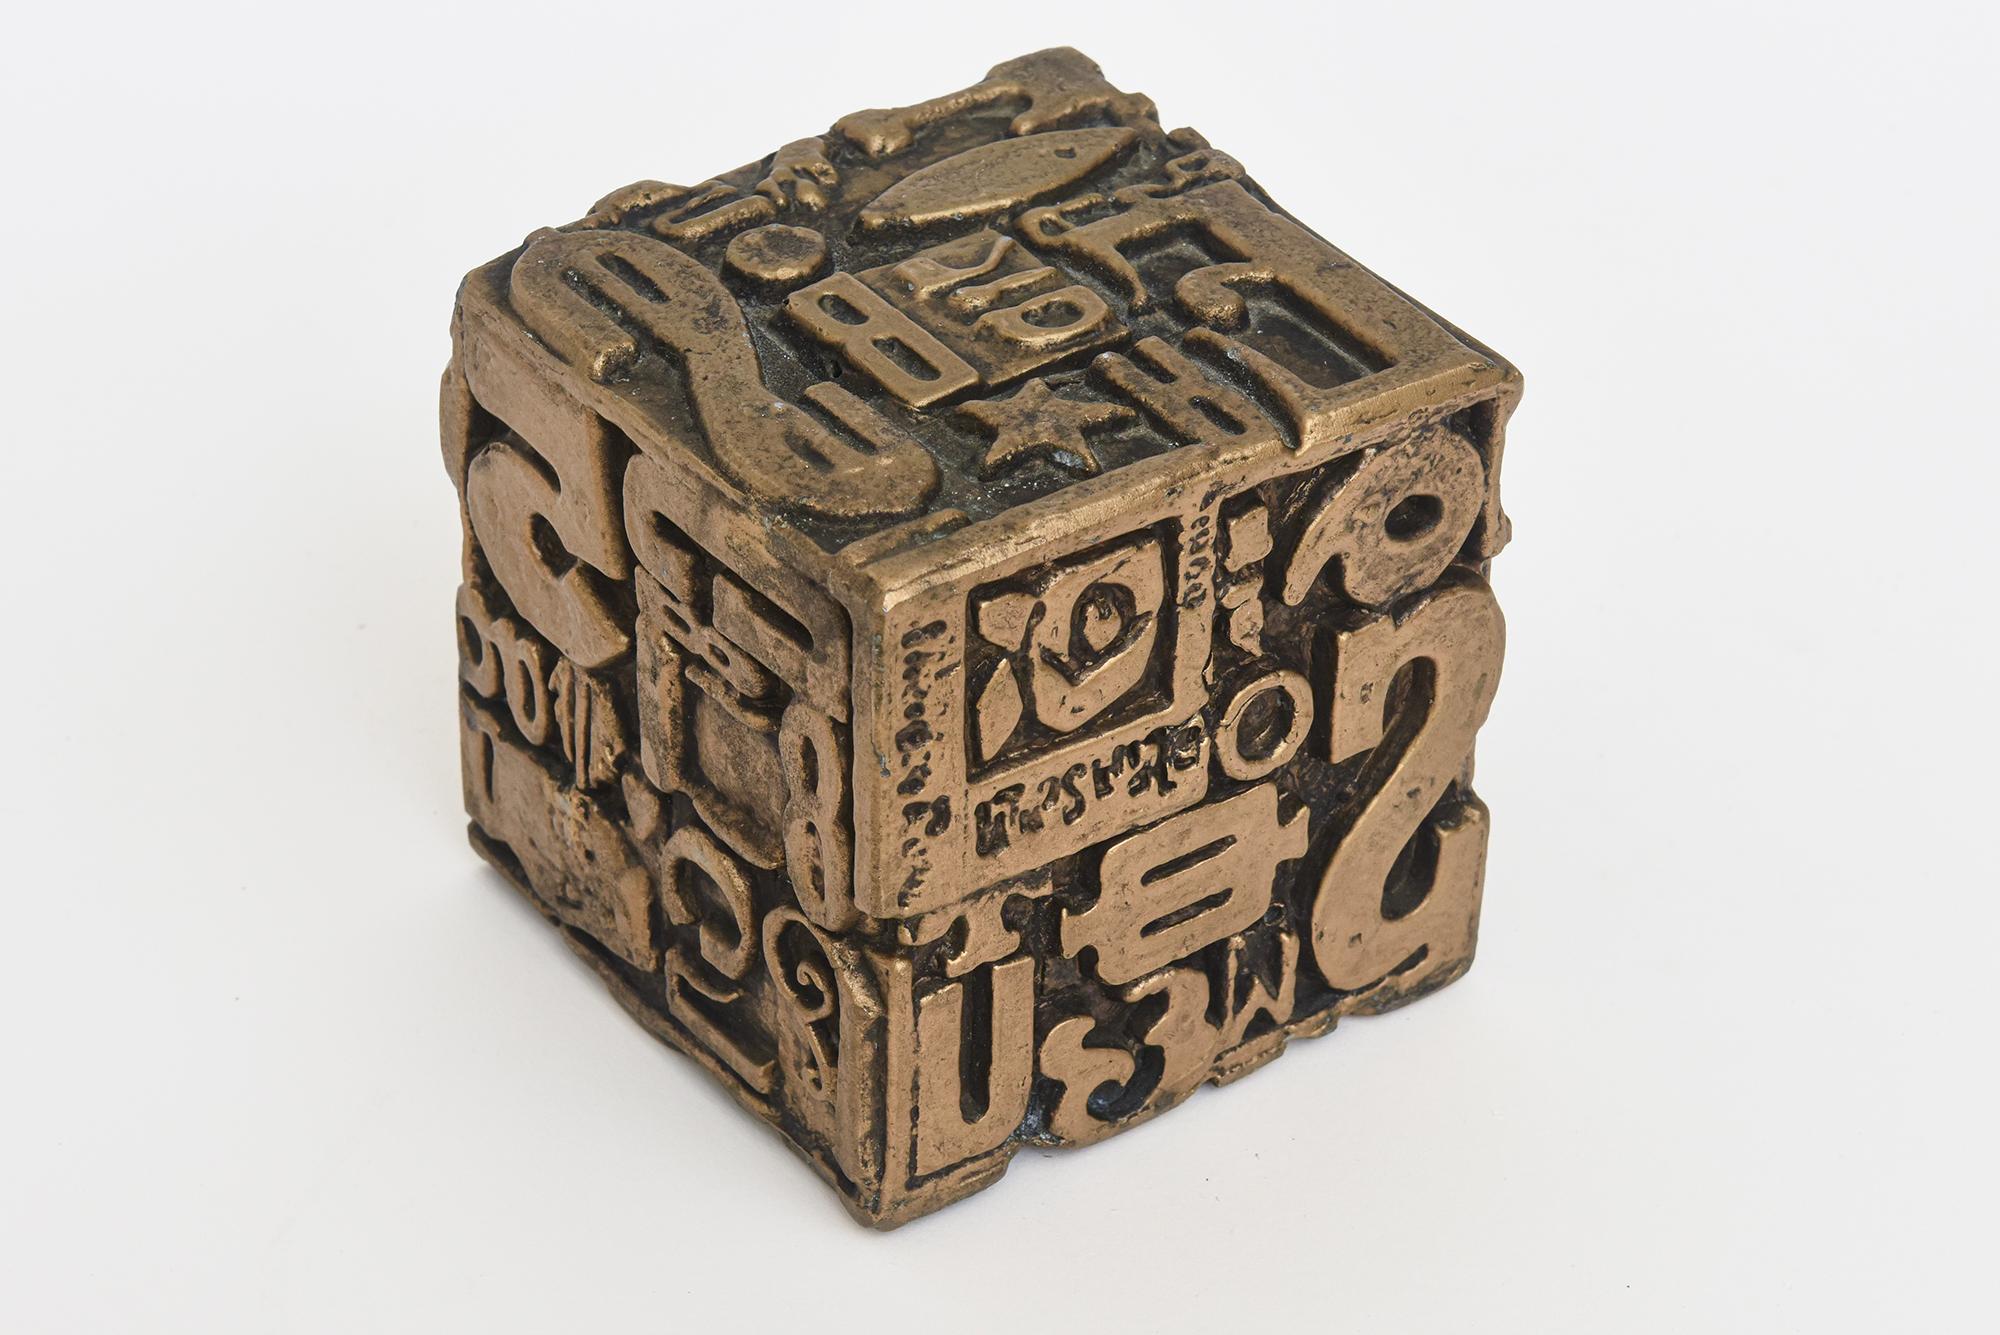 Sheldon Rose Vintage Alpha Typographic Cube Sculpture Mixed Media In Good Condition For Sale In North Miami, FL